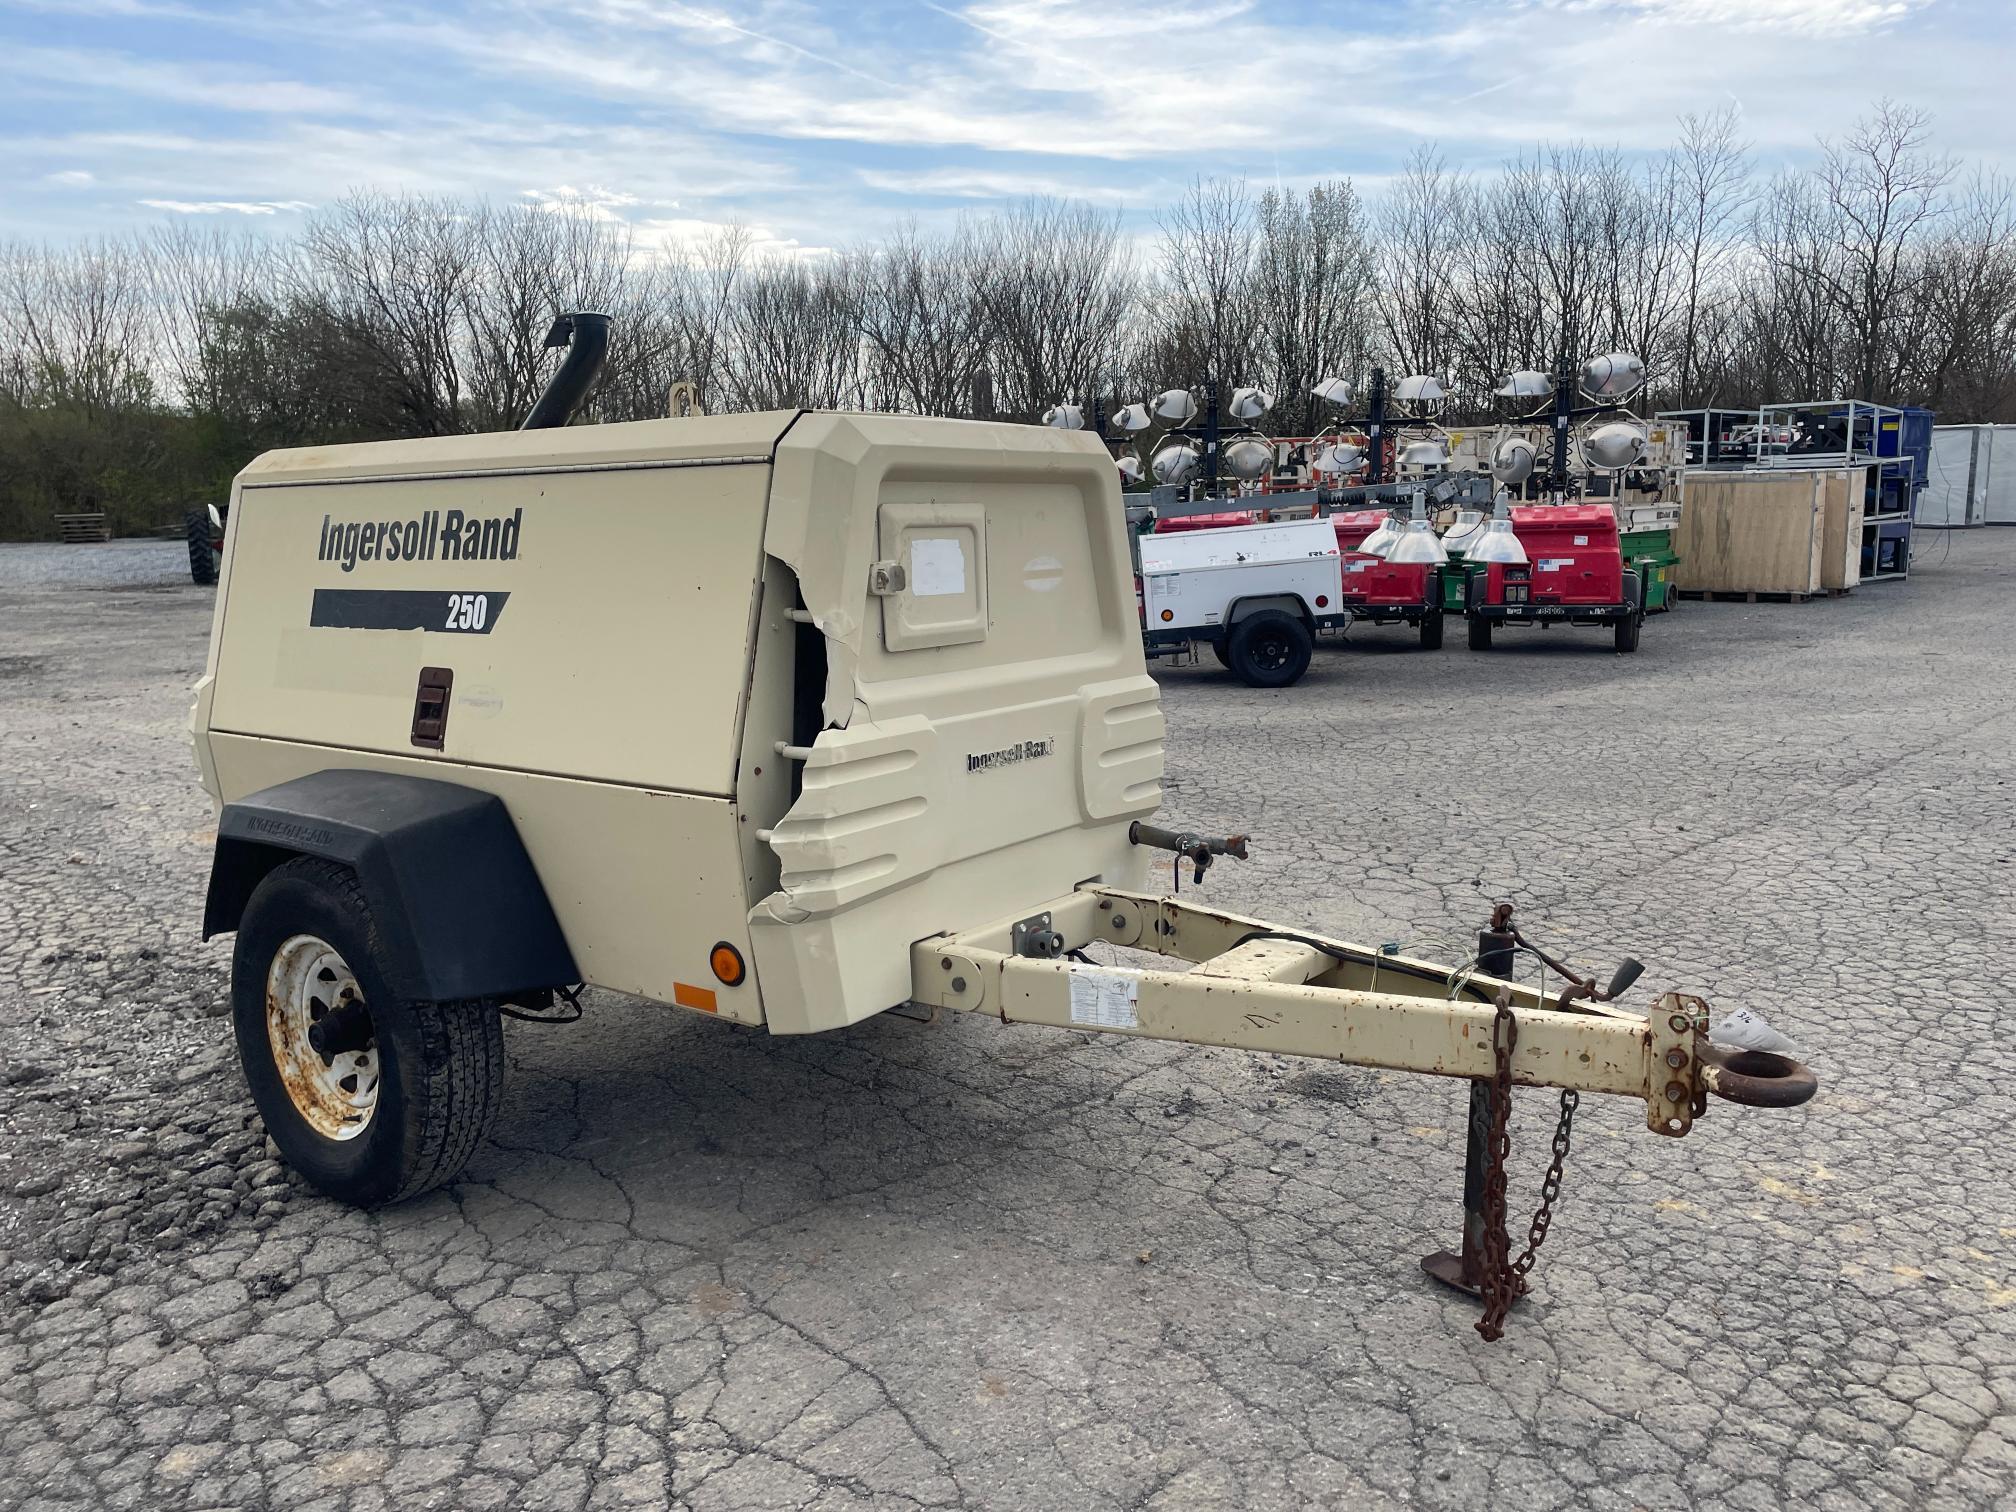 2003 Ingersoll Rand 250 Towable Air Compressor